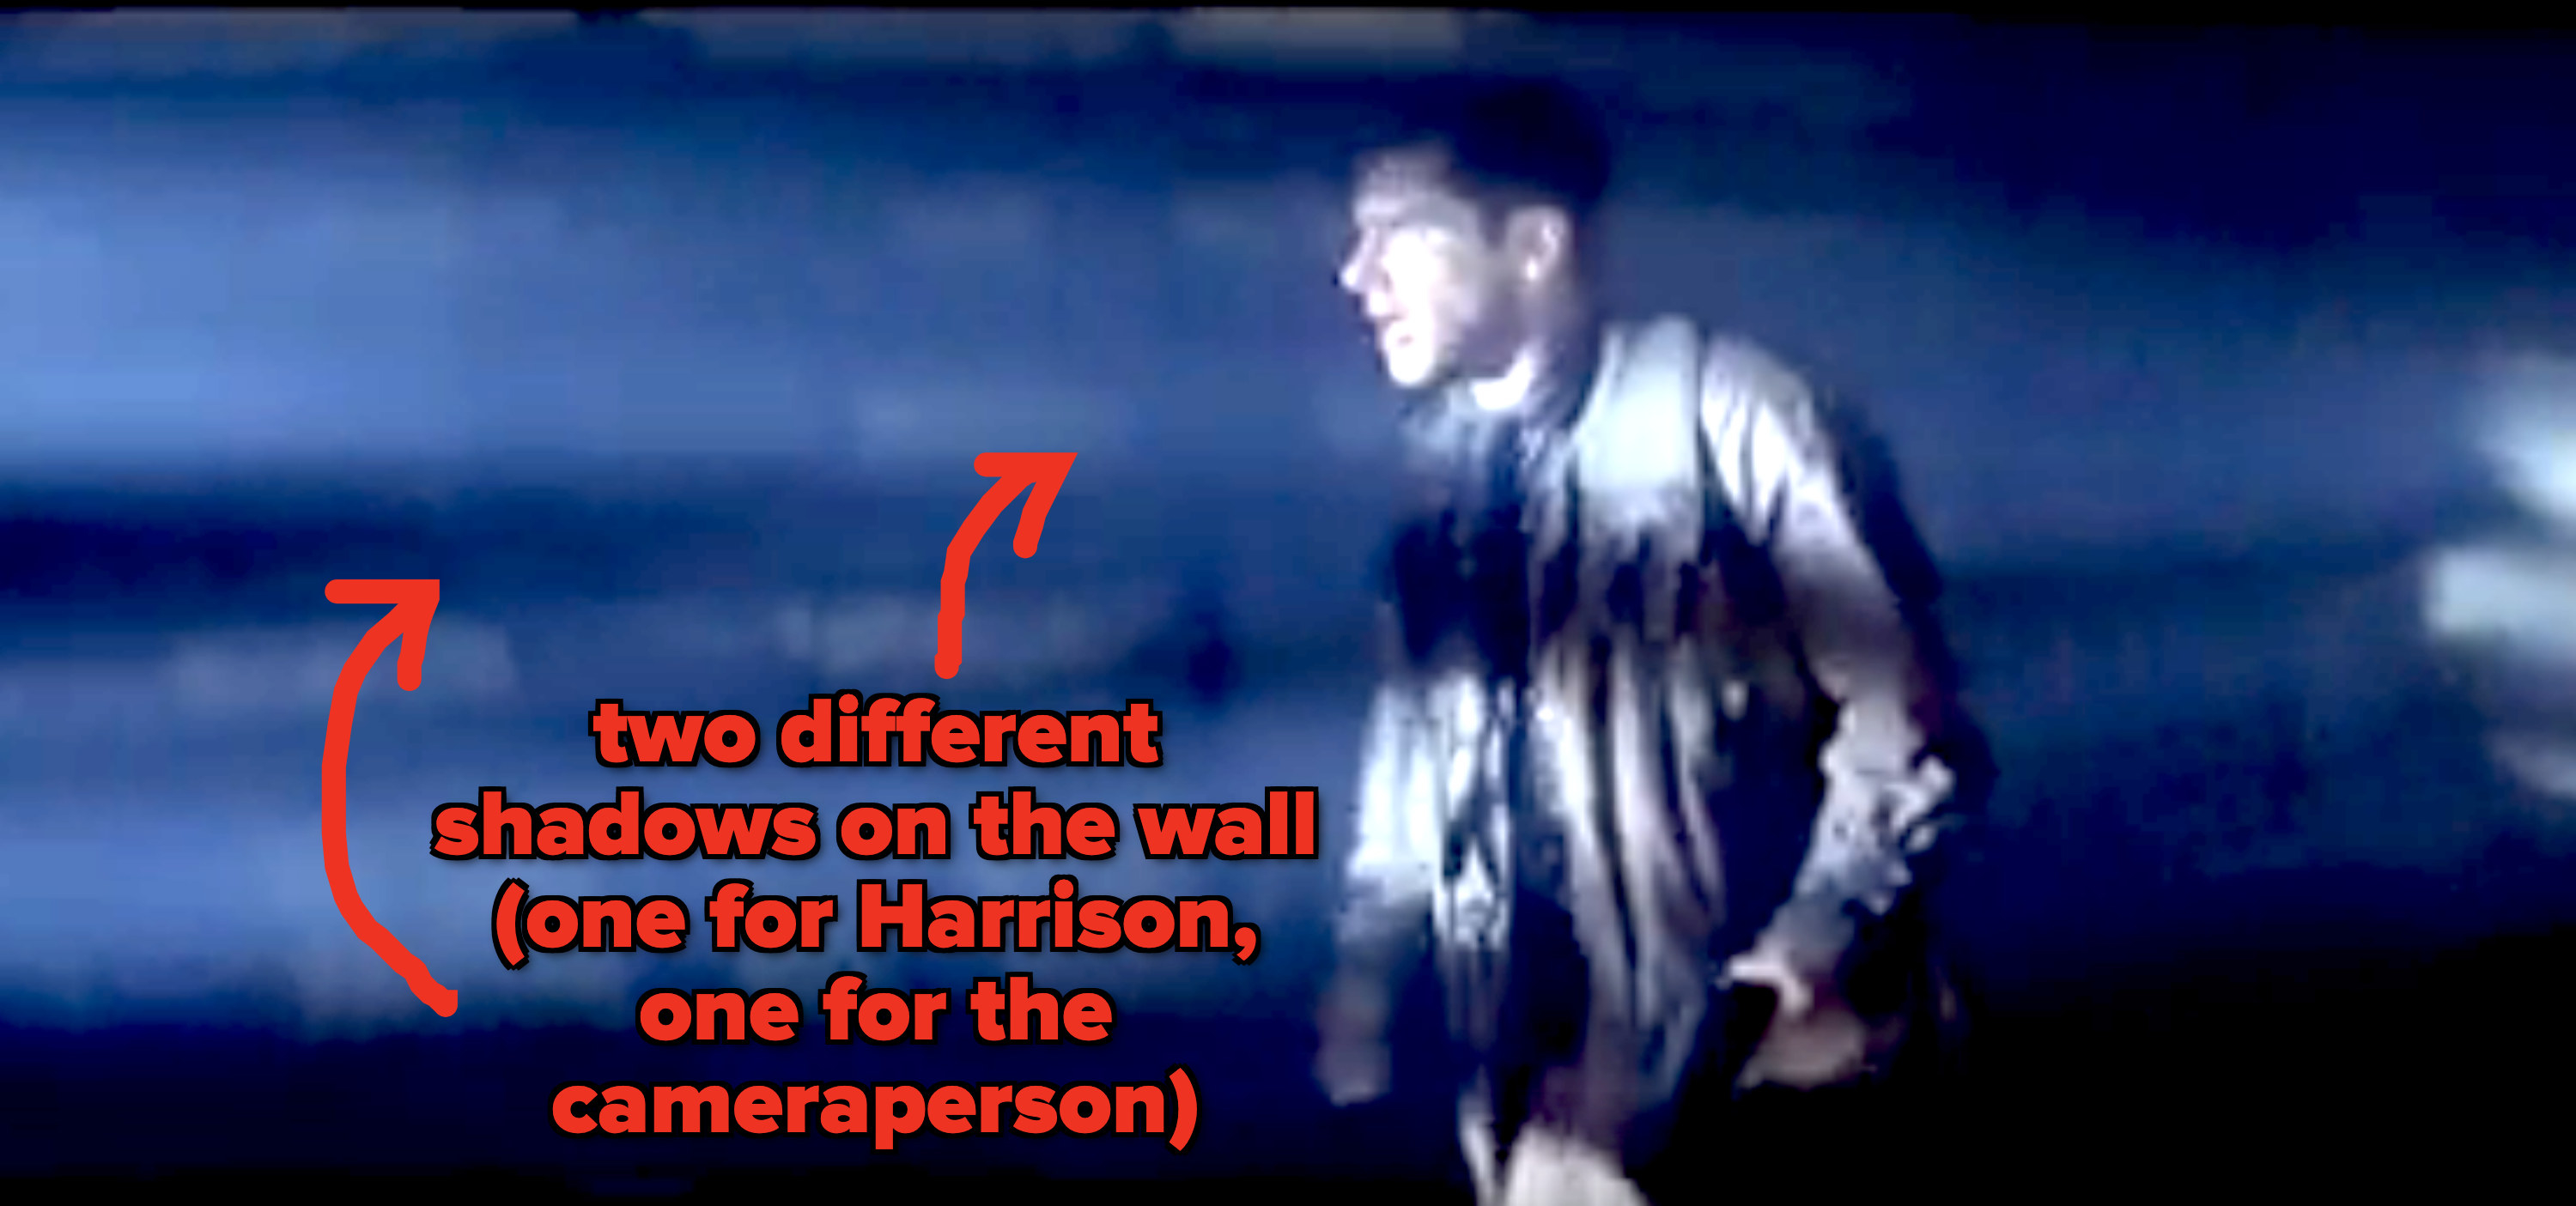 There are two shadows being cast on the wall; one by Harrison Ford who is by himself in the scene, and the other by the camera person filming him